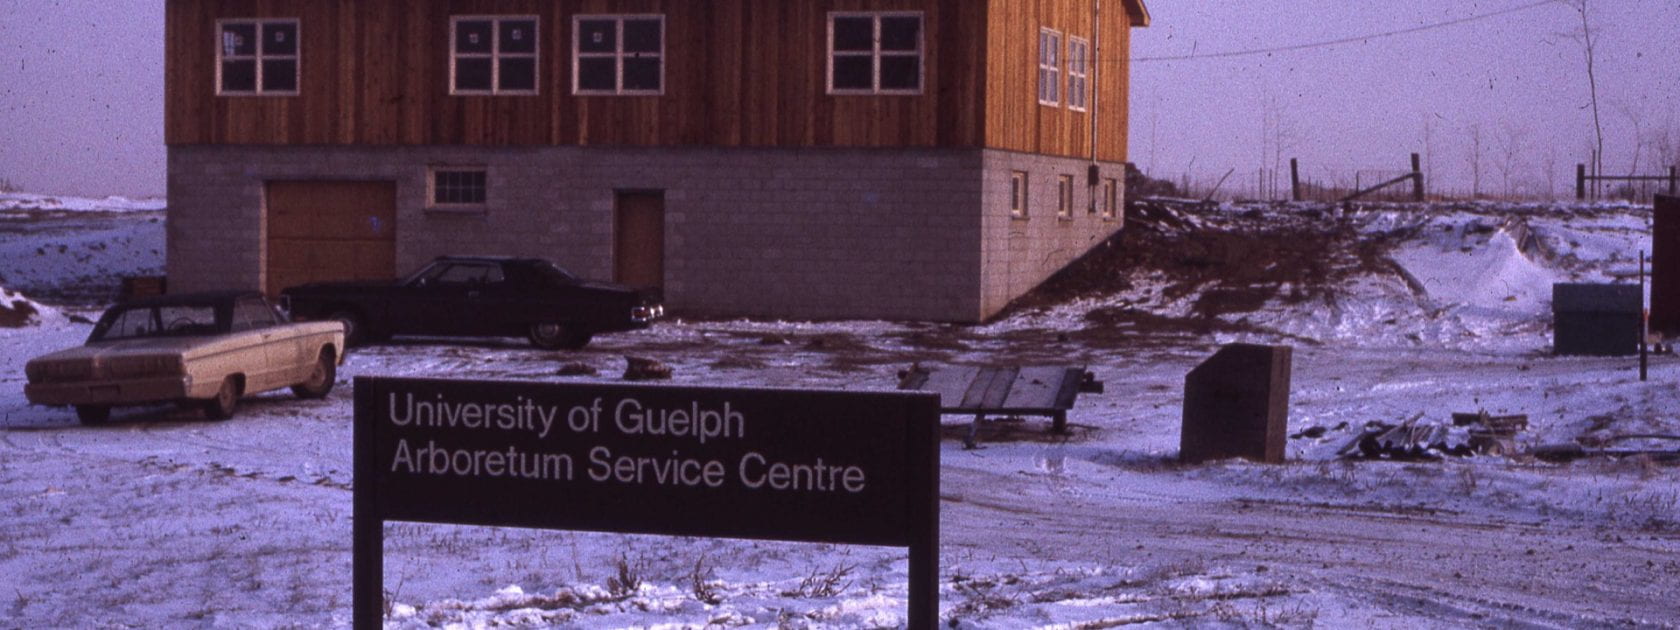 In the background, a wood and brick two-level building stands surrounded by snow. Two cars are parked in front. A sign reads "University of Guelph Arboretum Service Centre" in front.